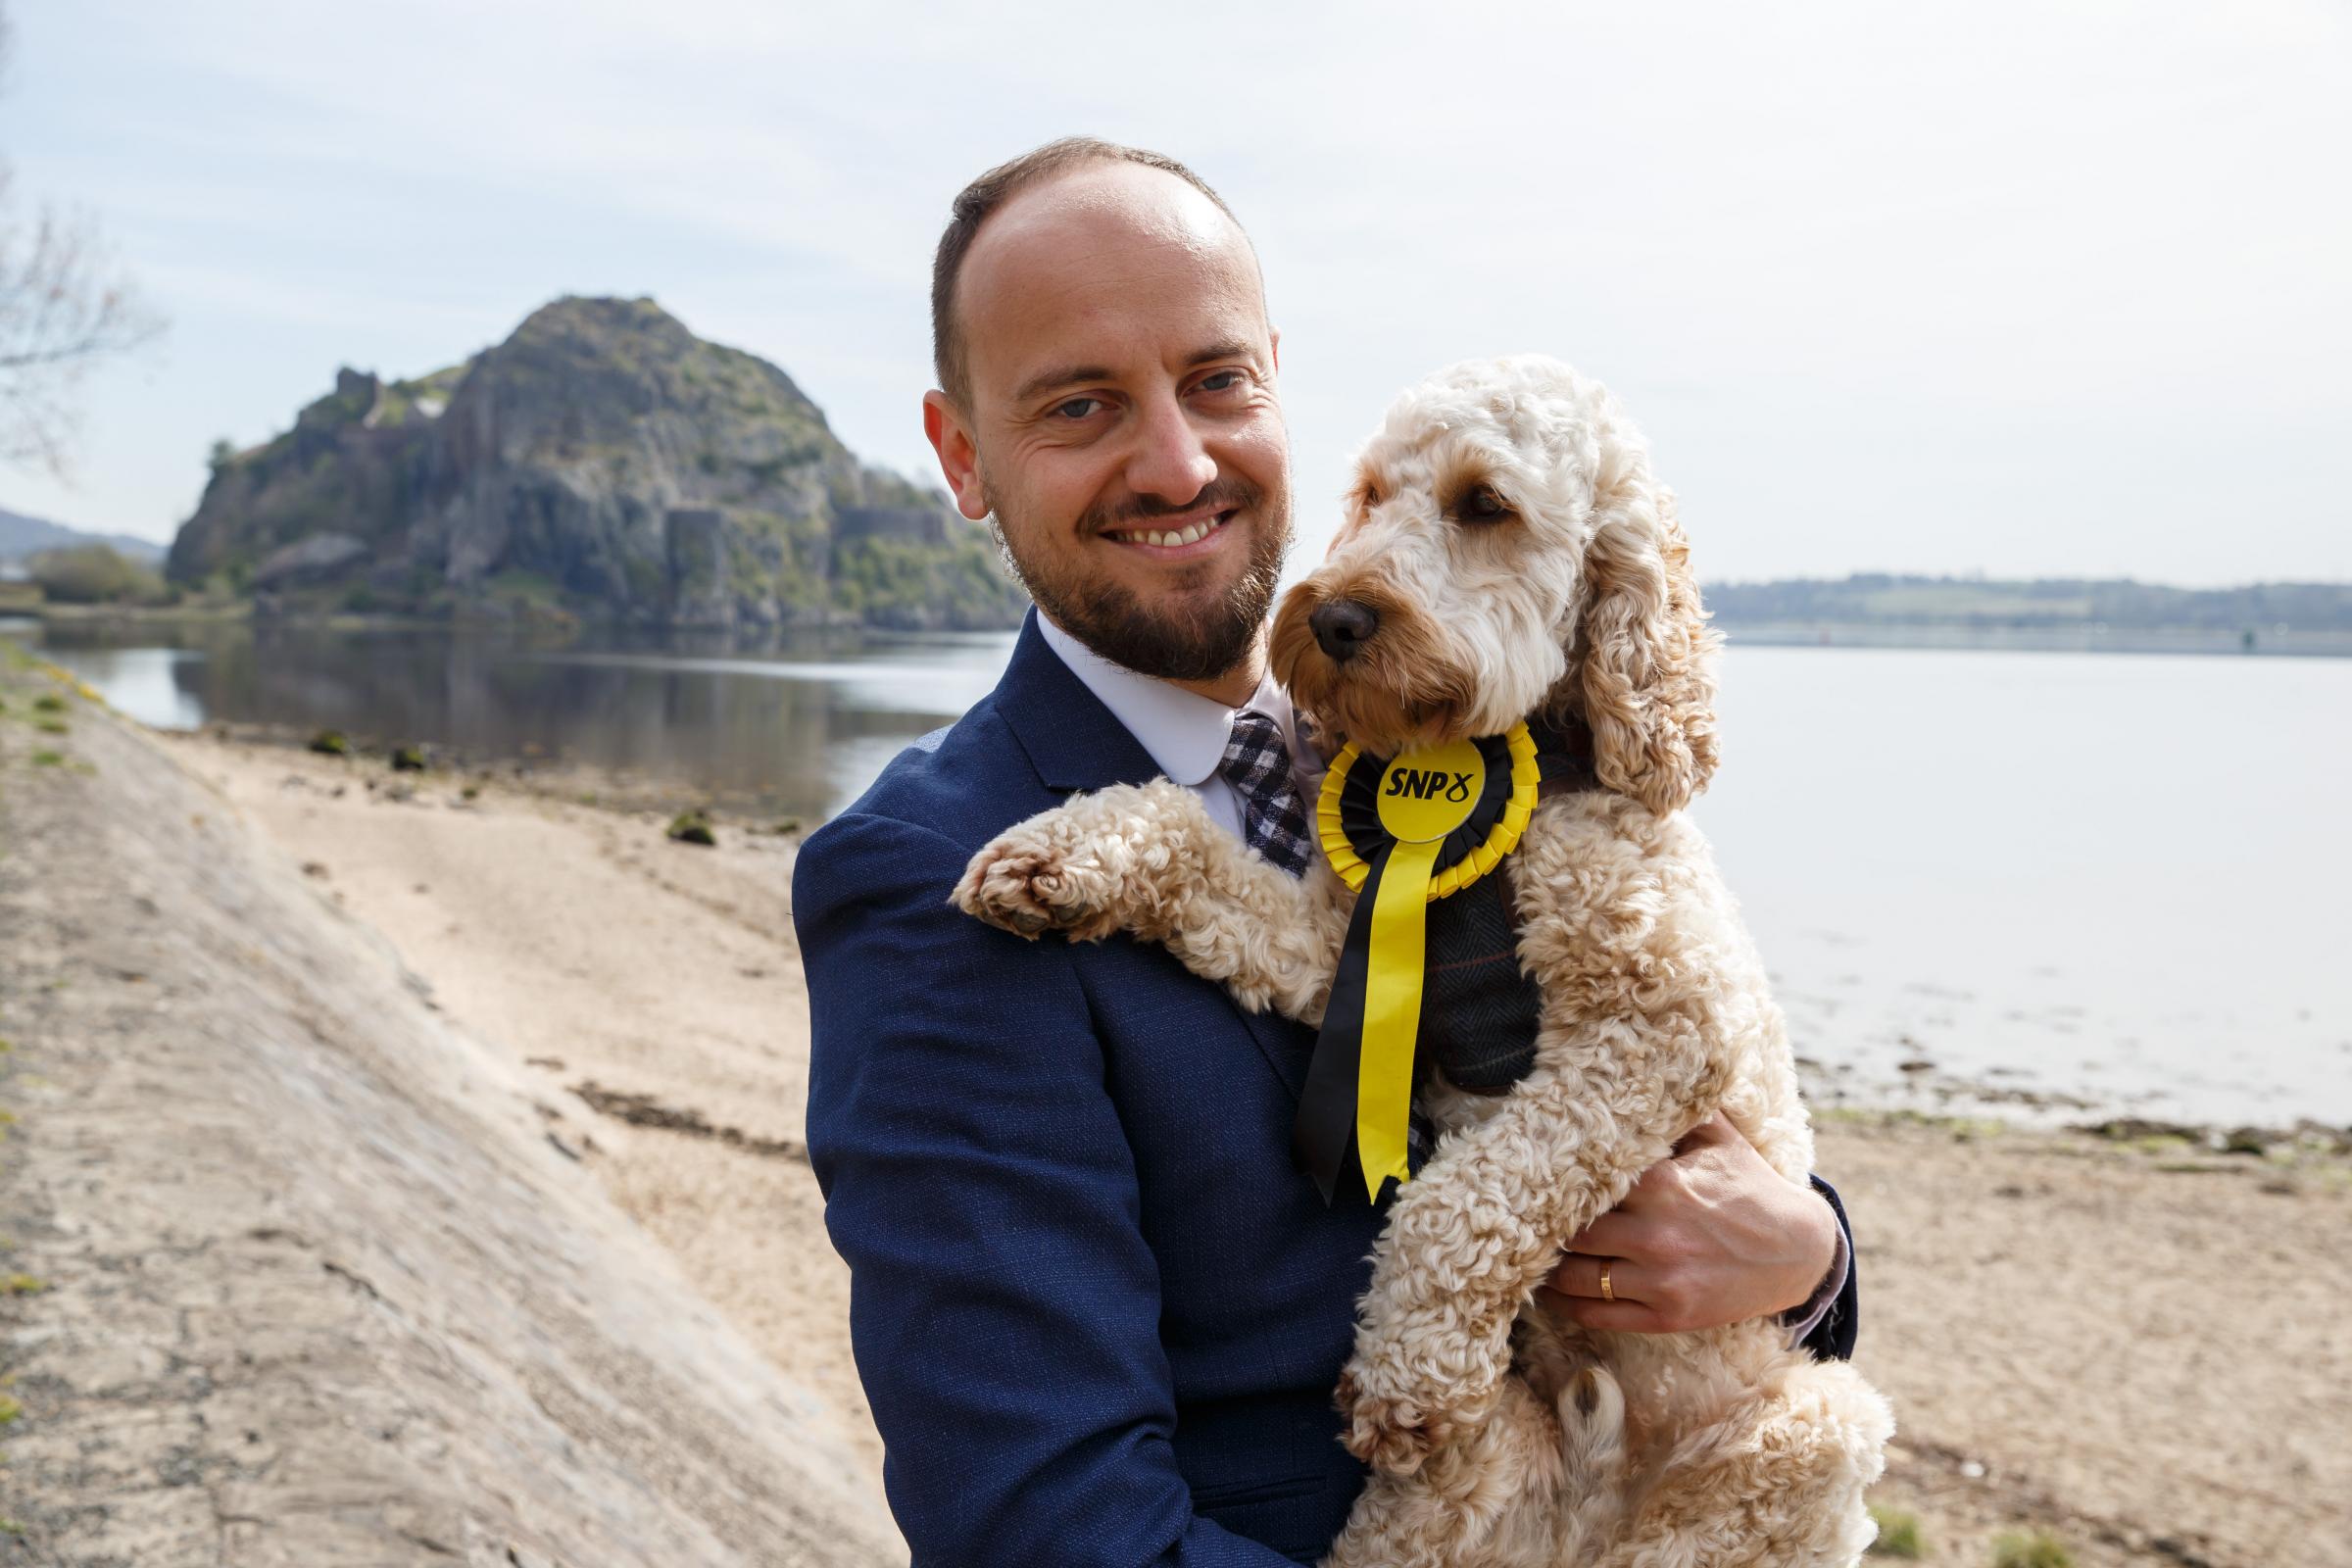  Dumbarton constituency feature ahead of the the Scottish parliament election on May 6th. Pictured is Toni Giugliano (with his dog Harris) in Dumbarton. Toni is the SNP candidate for the Dumbarton Scottish Parliament constituency. .. Photograph by Colin